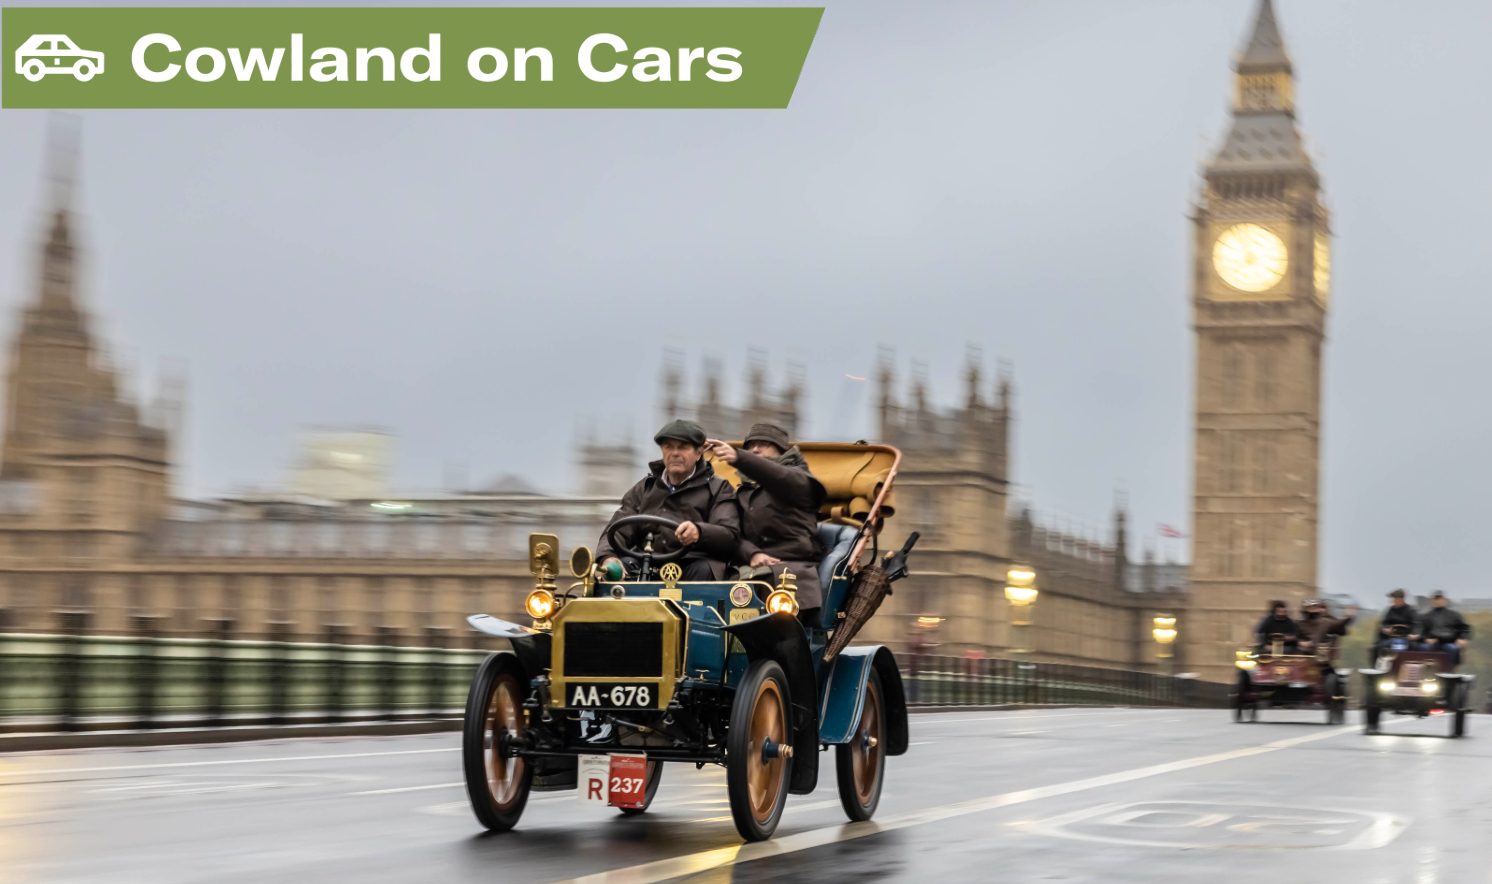 British grit and oil lamps on the London to Brighton Veteran Car Run